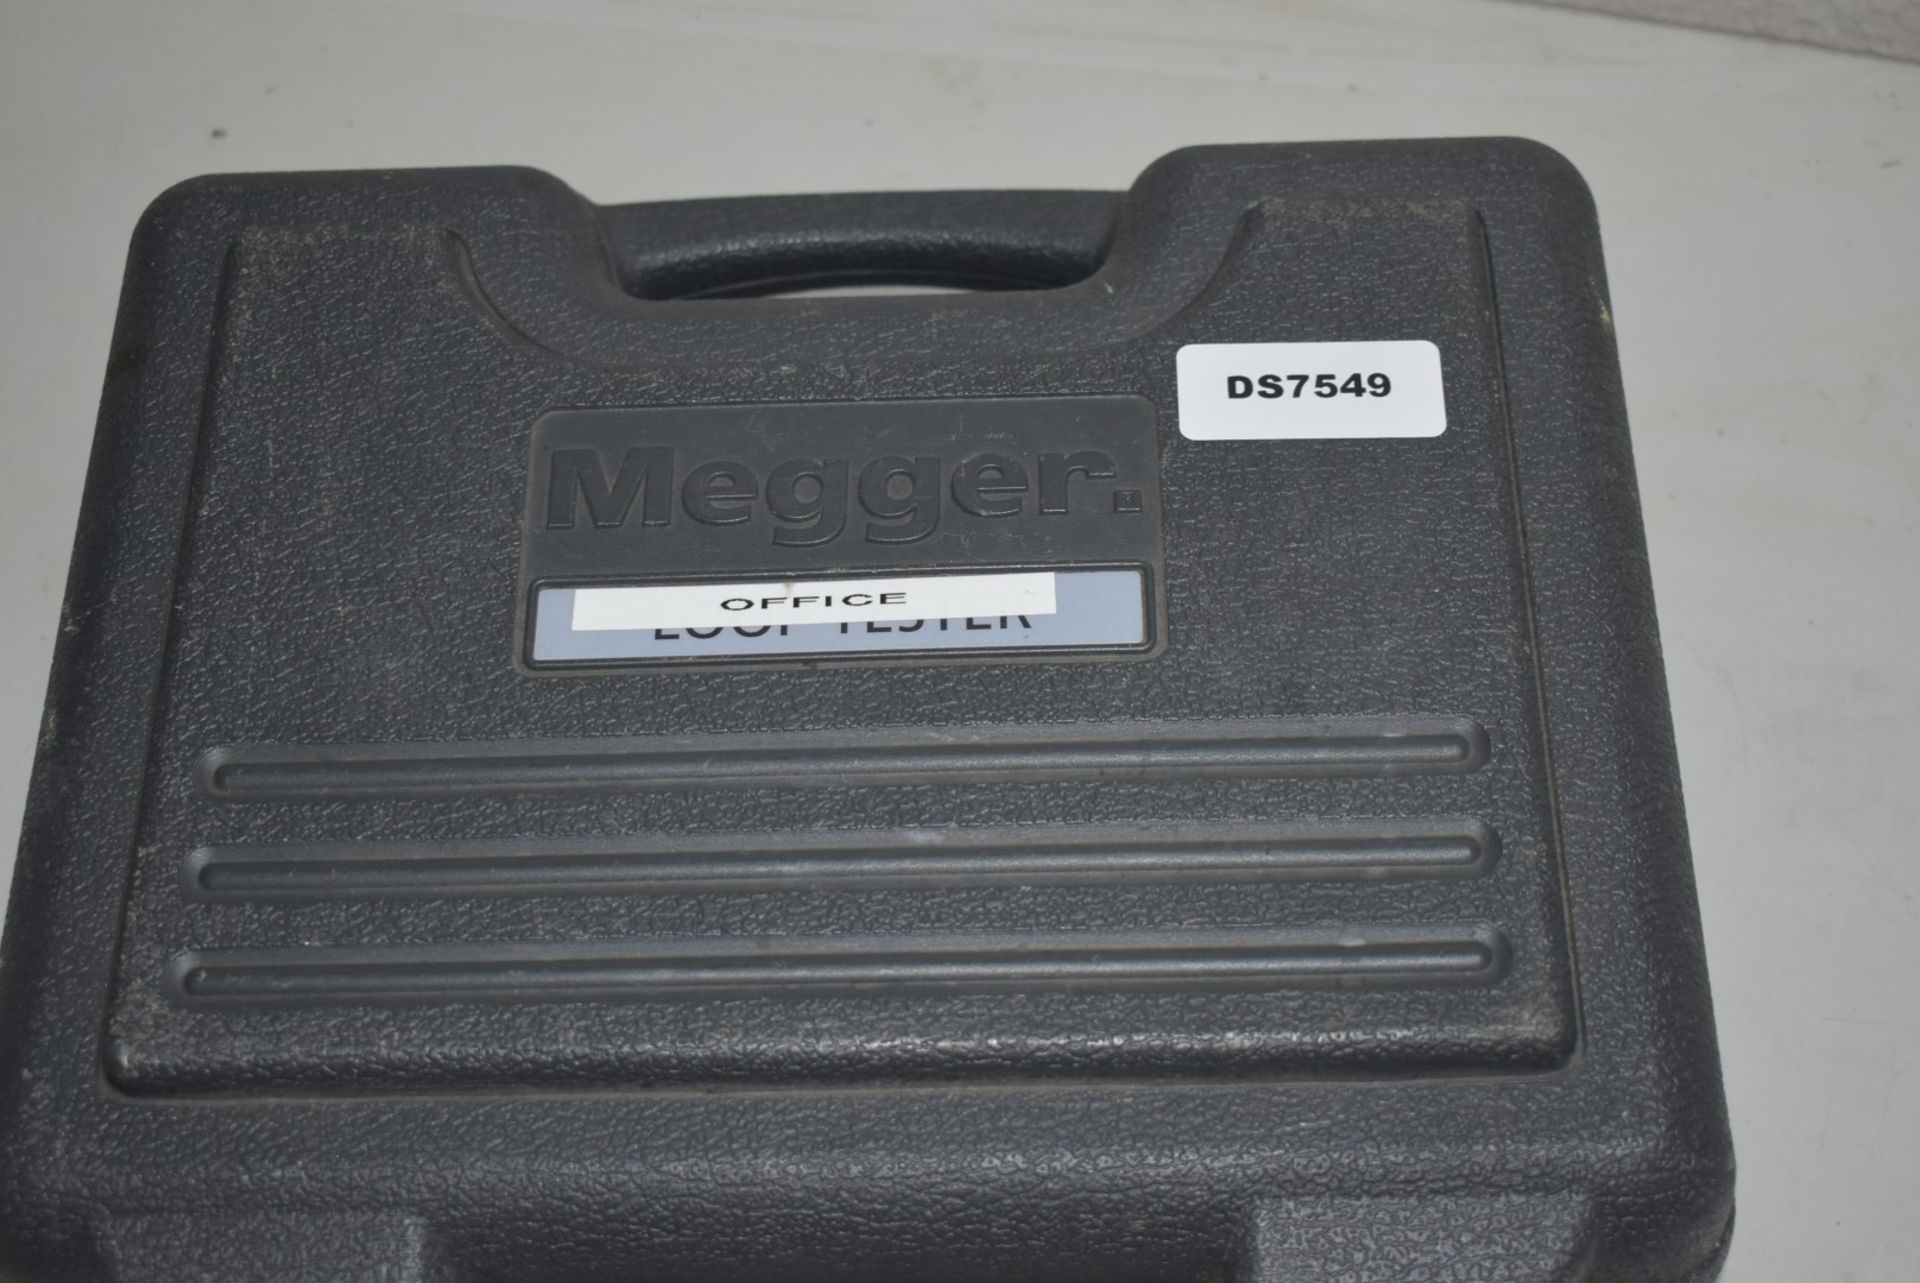 1 x MEGGER LTW425 Two-wire Non-tripping High Resolution Loop Tester - Ref: DS7549 ALT - CL816 - - Image 2 of 7